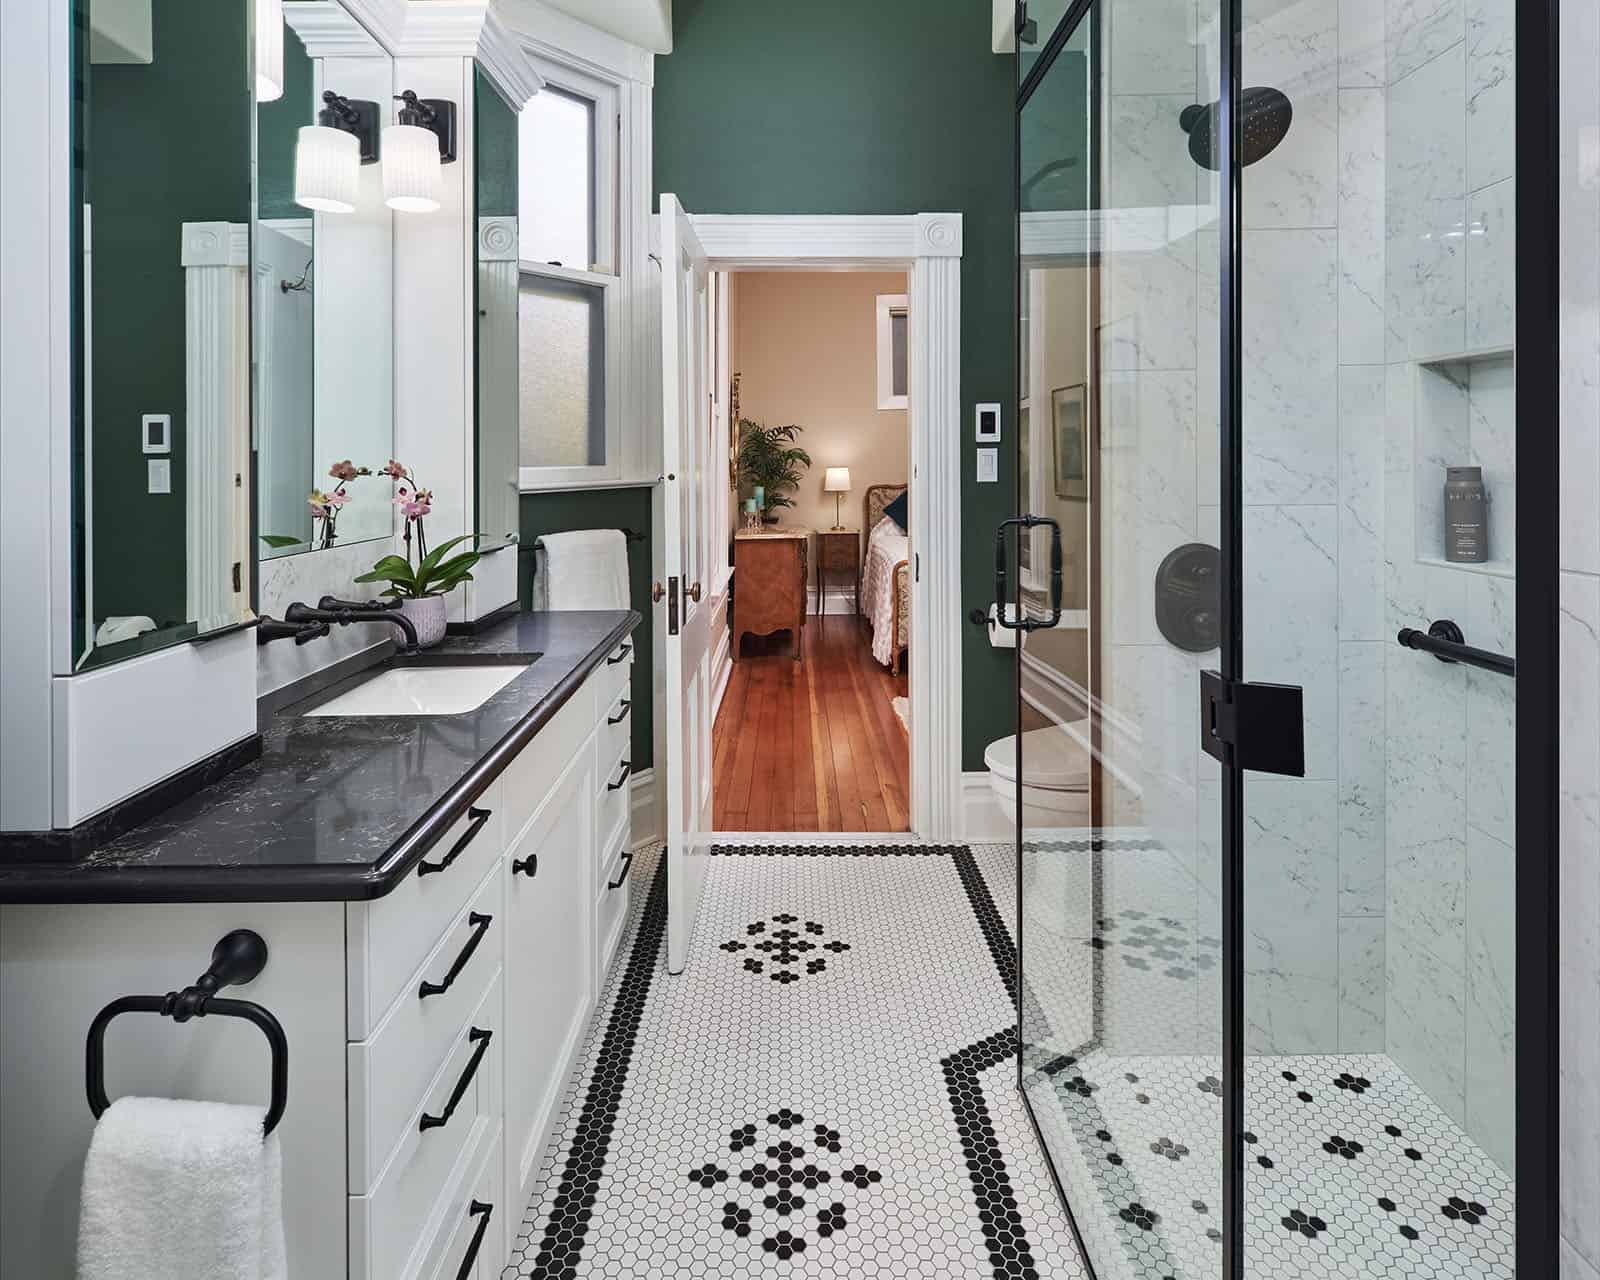 Green trend on display in this Portland area bathroom remodel